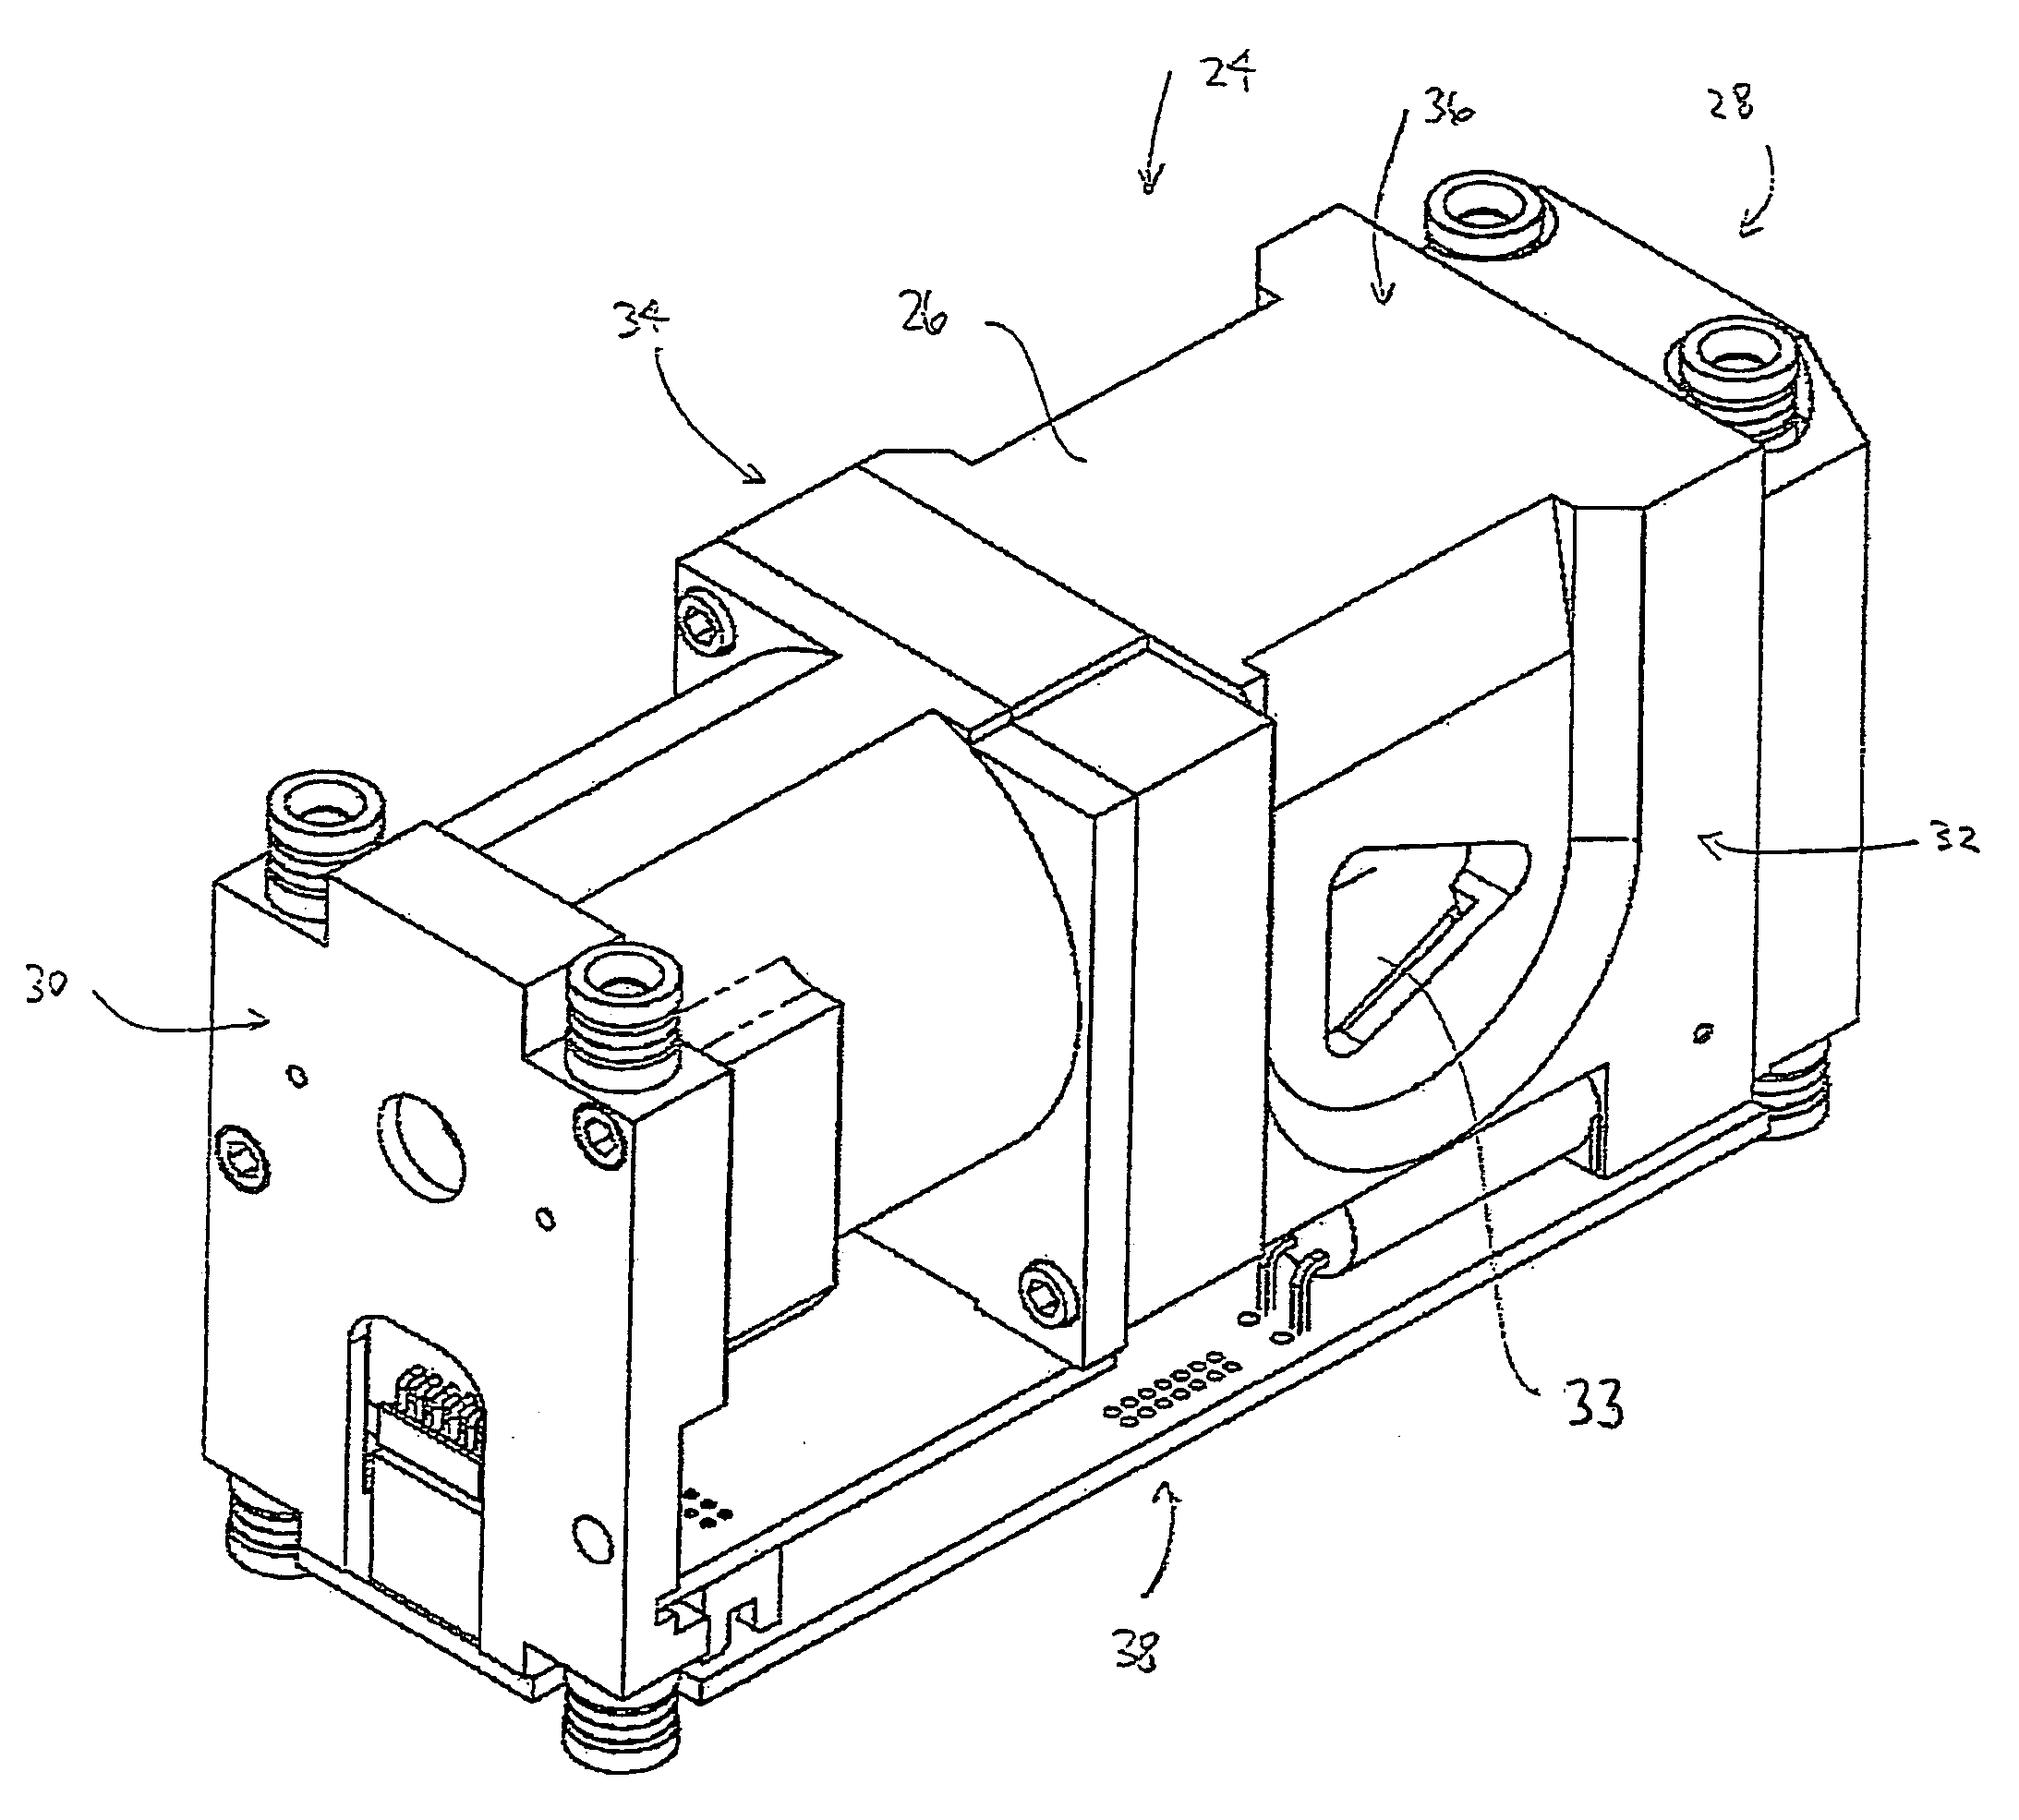 Method and apparatus for attenuating compressor noise